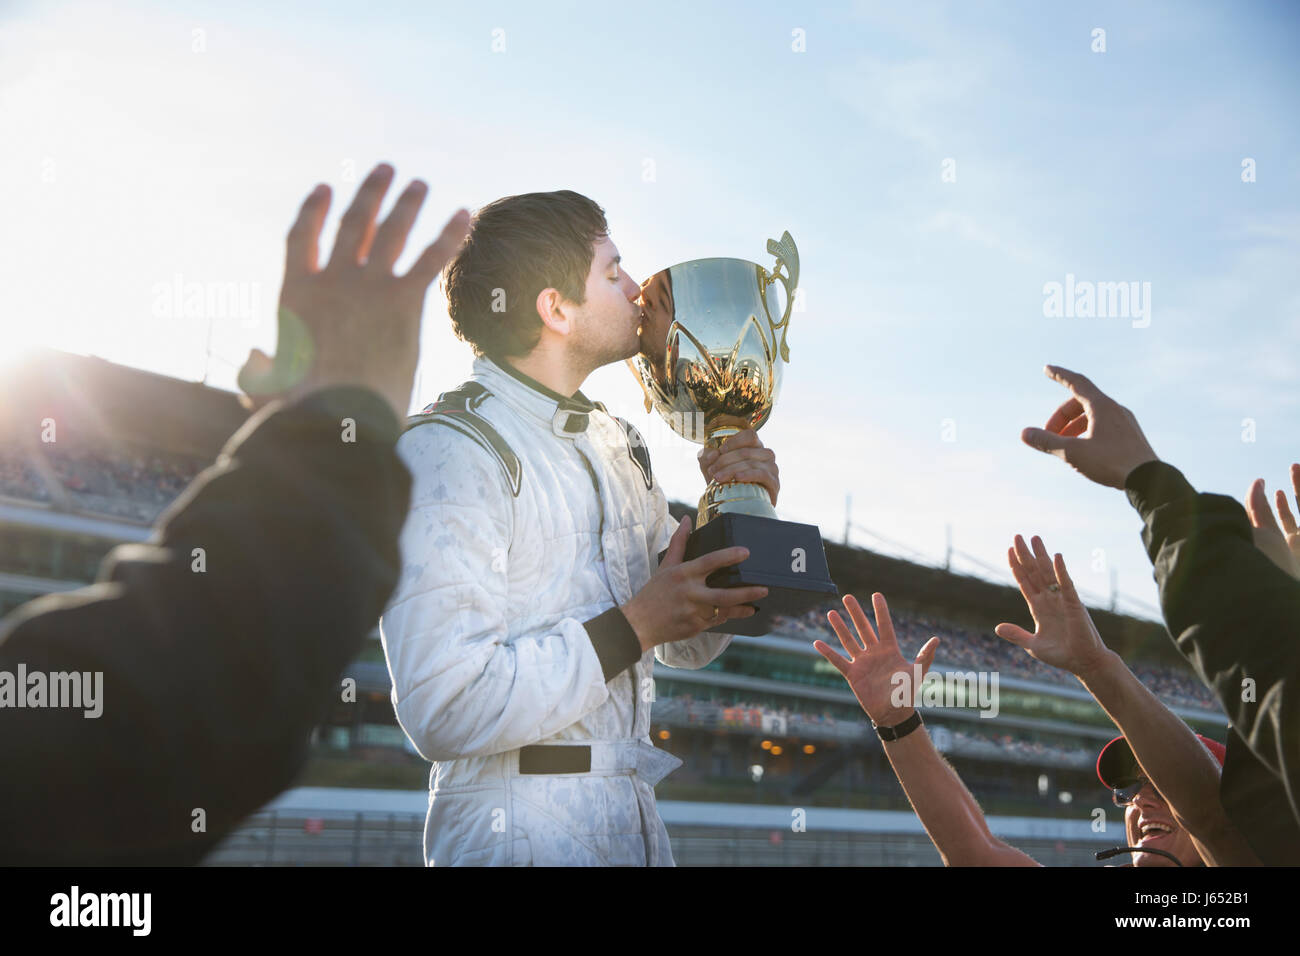 Formula one racing team cheering around driver kissing trophy, celebrating victory Stock Photo